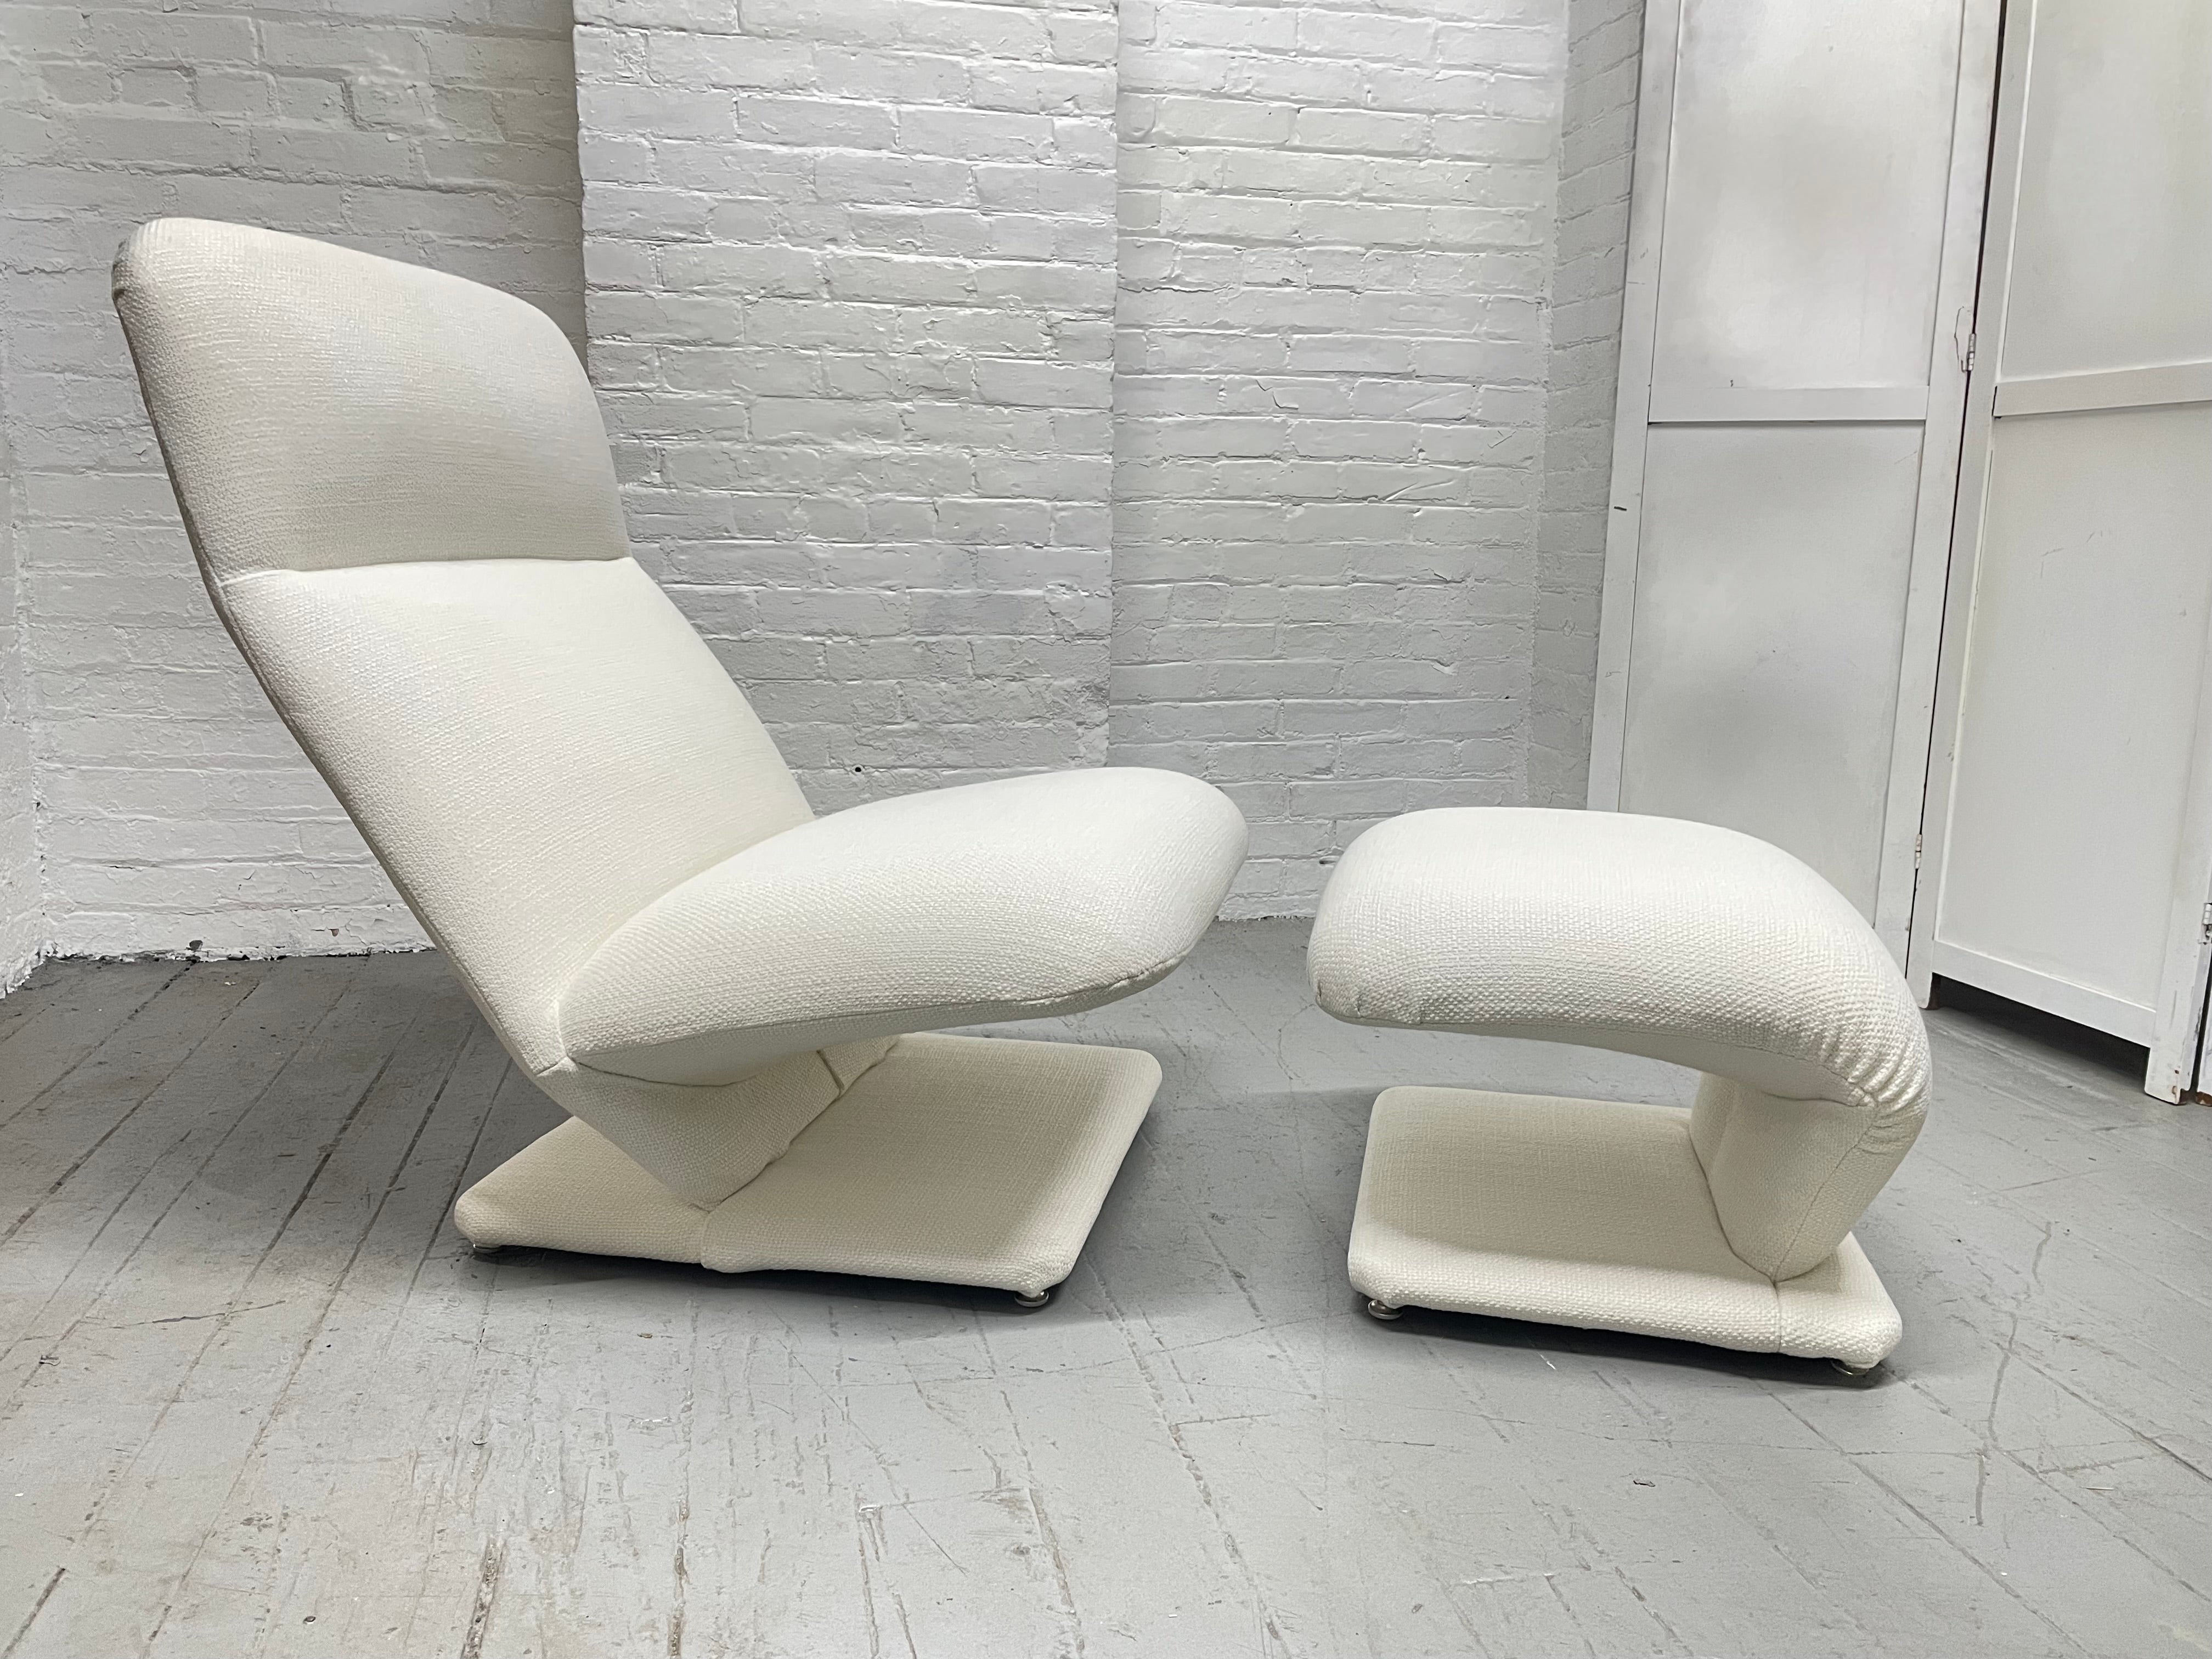 Mid-Century Modern Sculptural Lounge Chair and Matching Ottoman
Chair measures: 35H x 27W x 32D.
Ottoman measures: 15H x 22W x 20D.